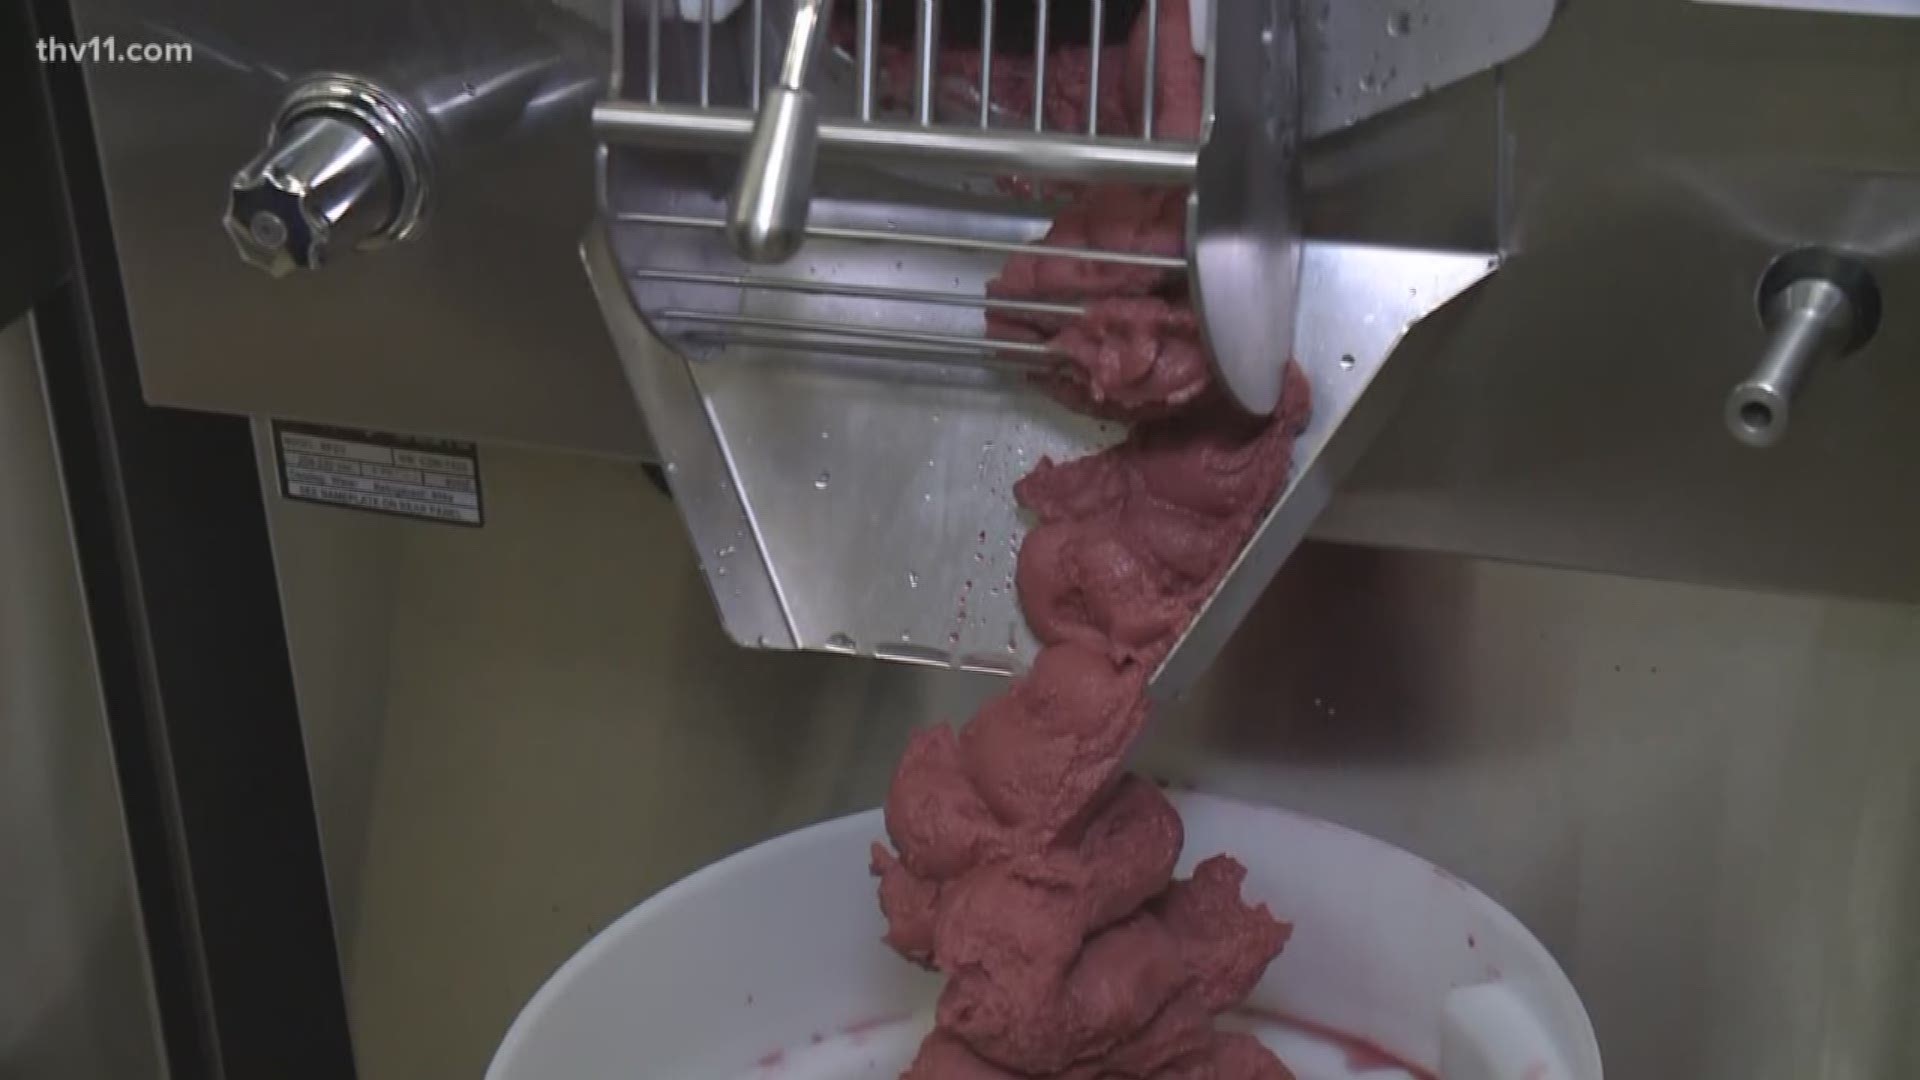 The folks at Rita's show us how Italian ice is made.